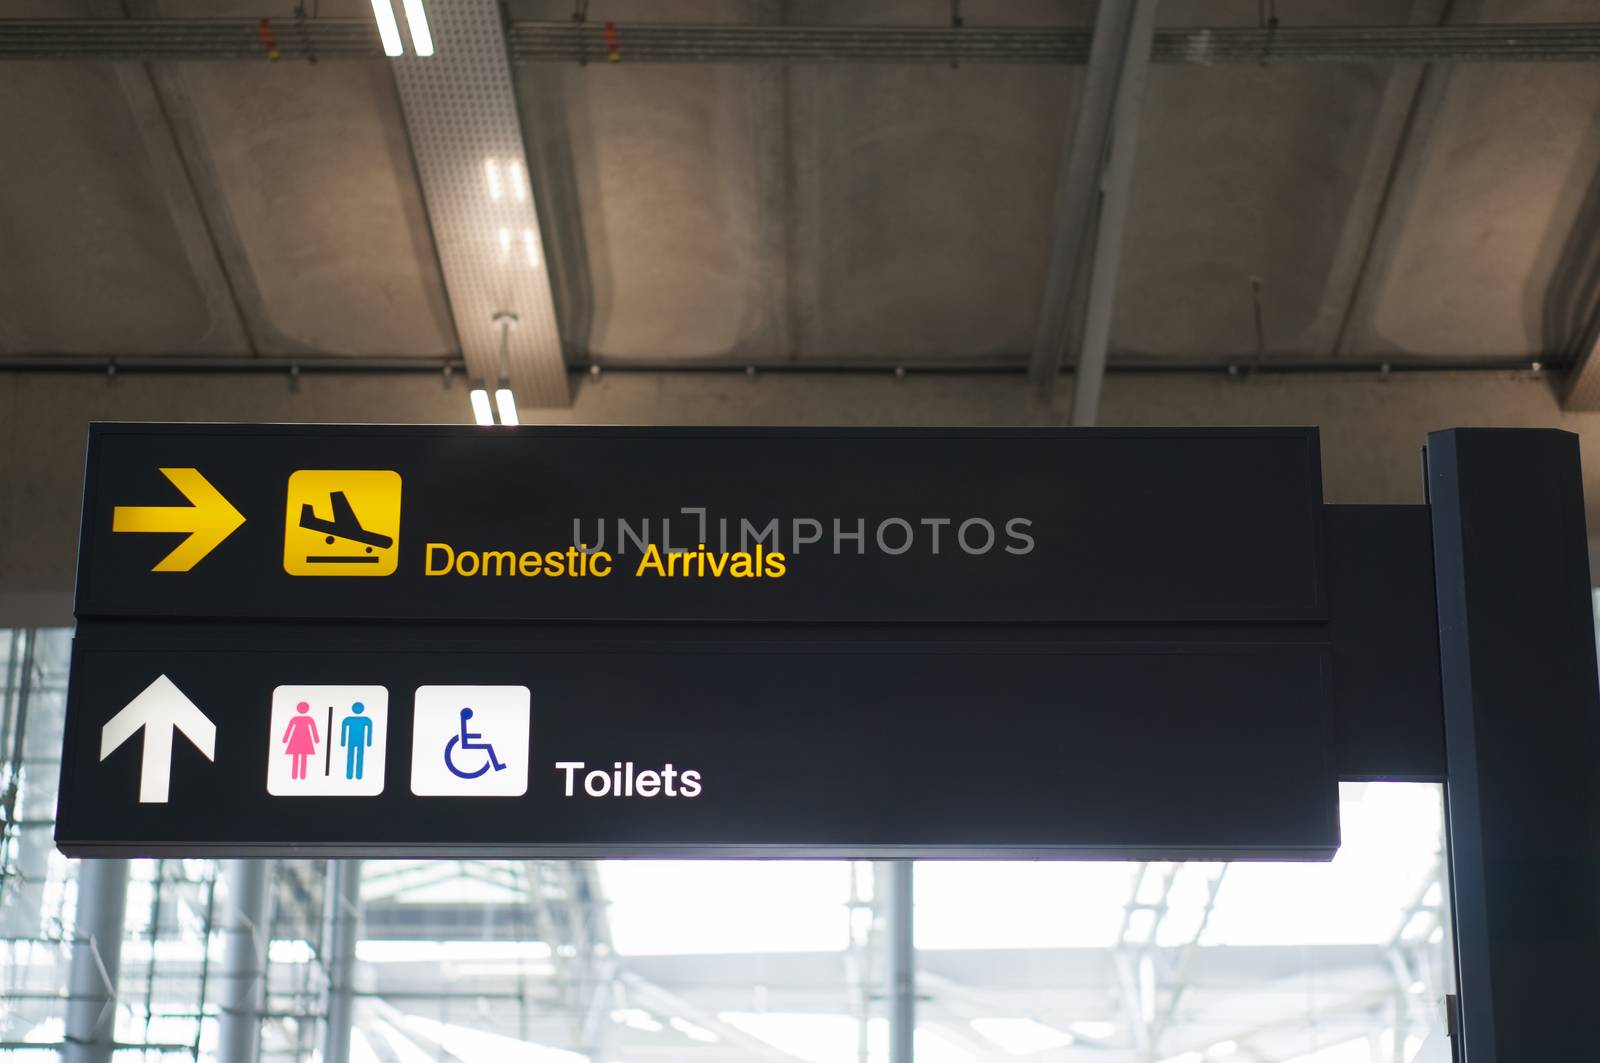 Domestic arrivals and toilets information board sign with yellow and white character on black background at international airport terminal.